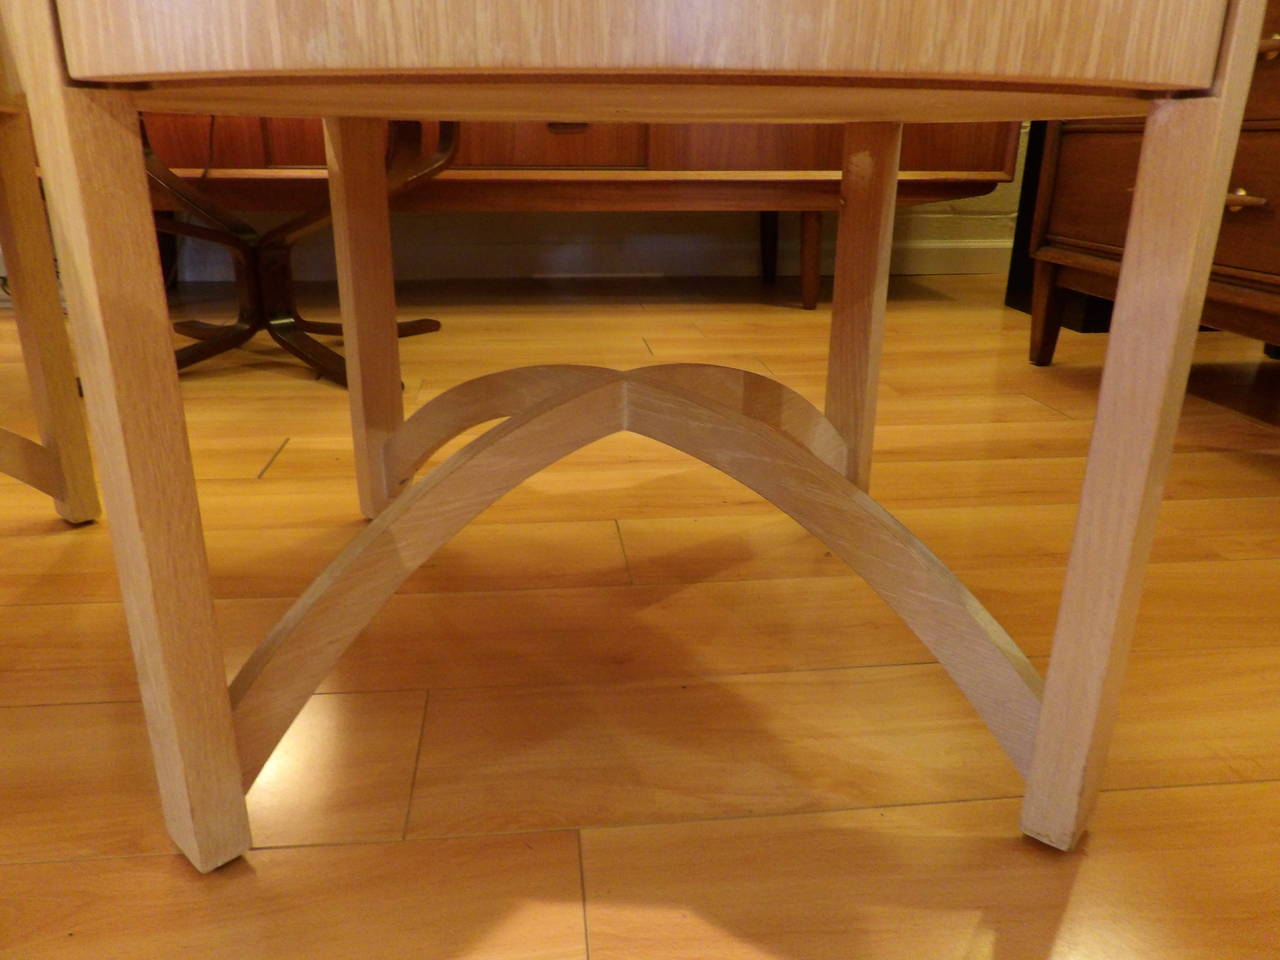 Oak Century Furniture Circular End Tables Attributed to Jay Spectre